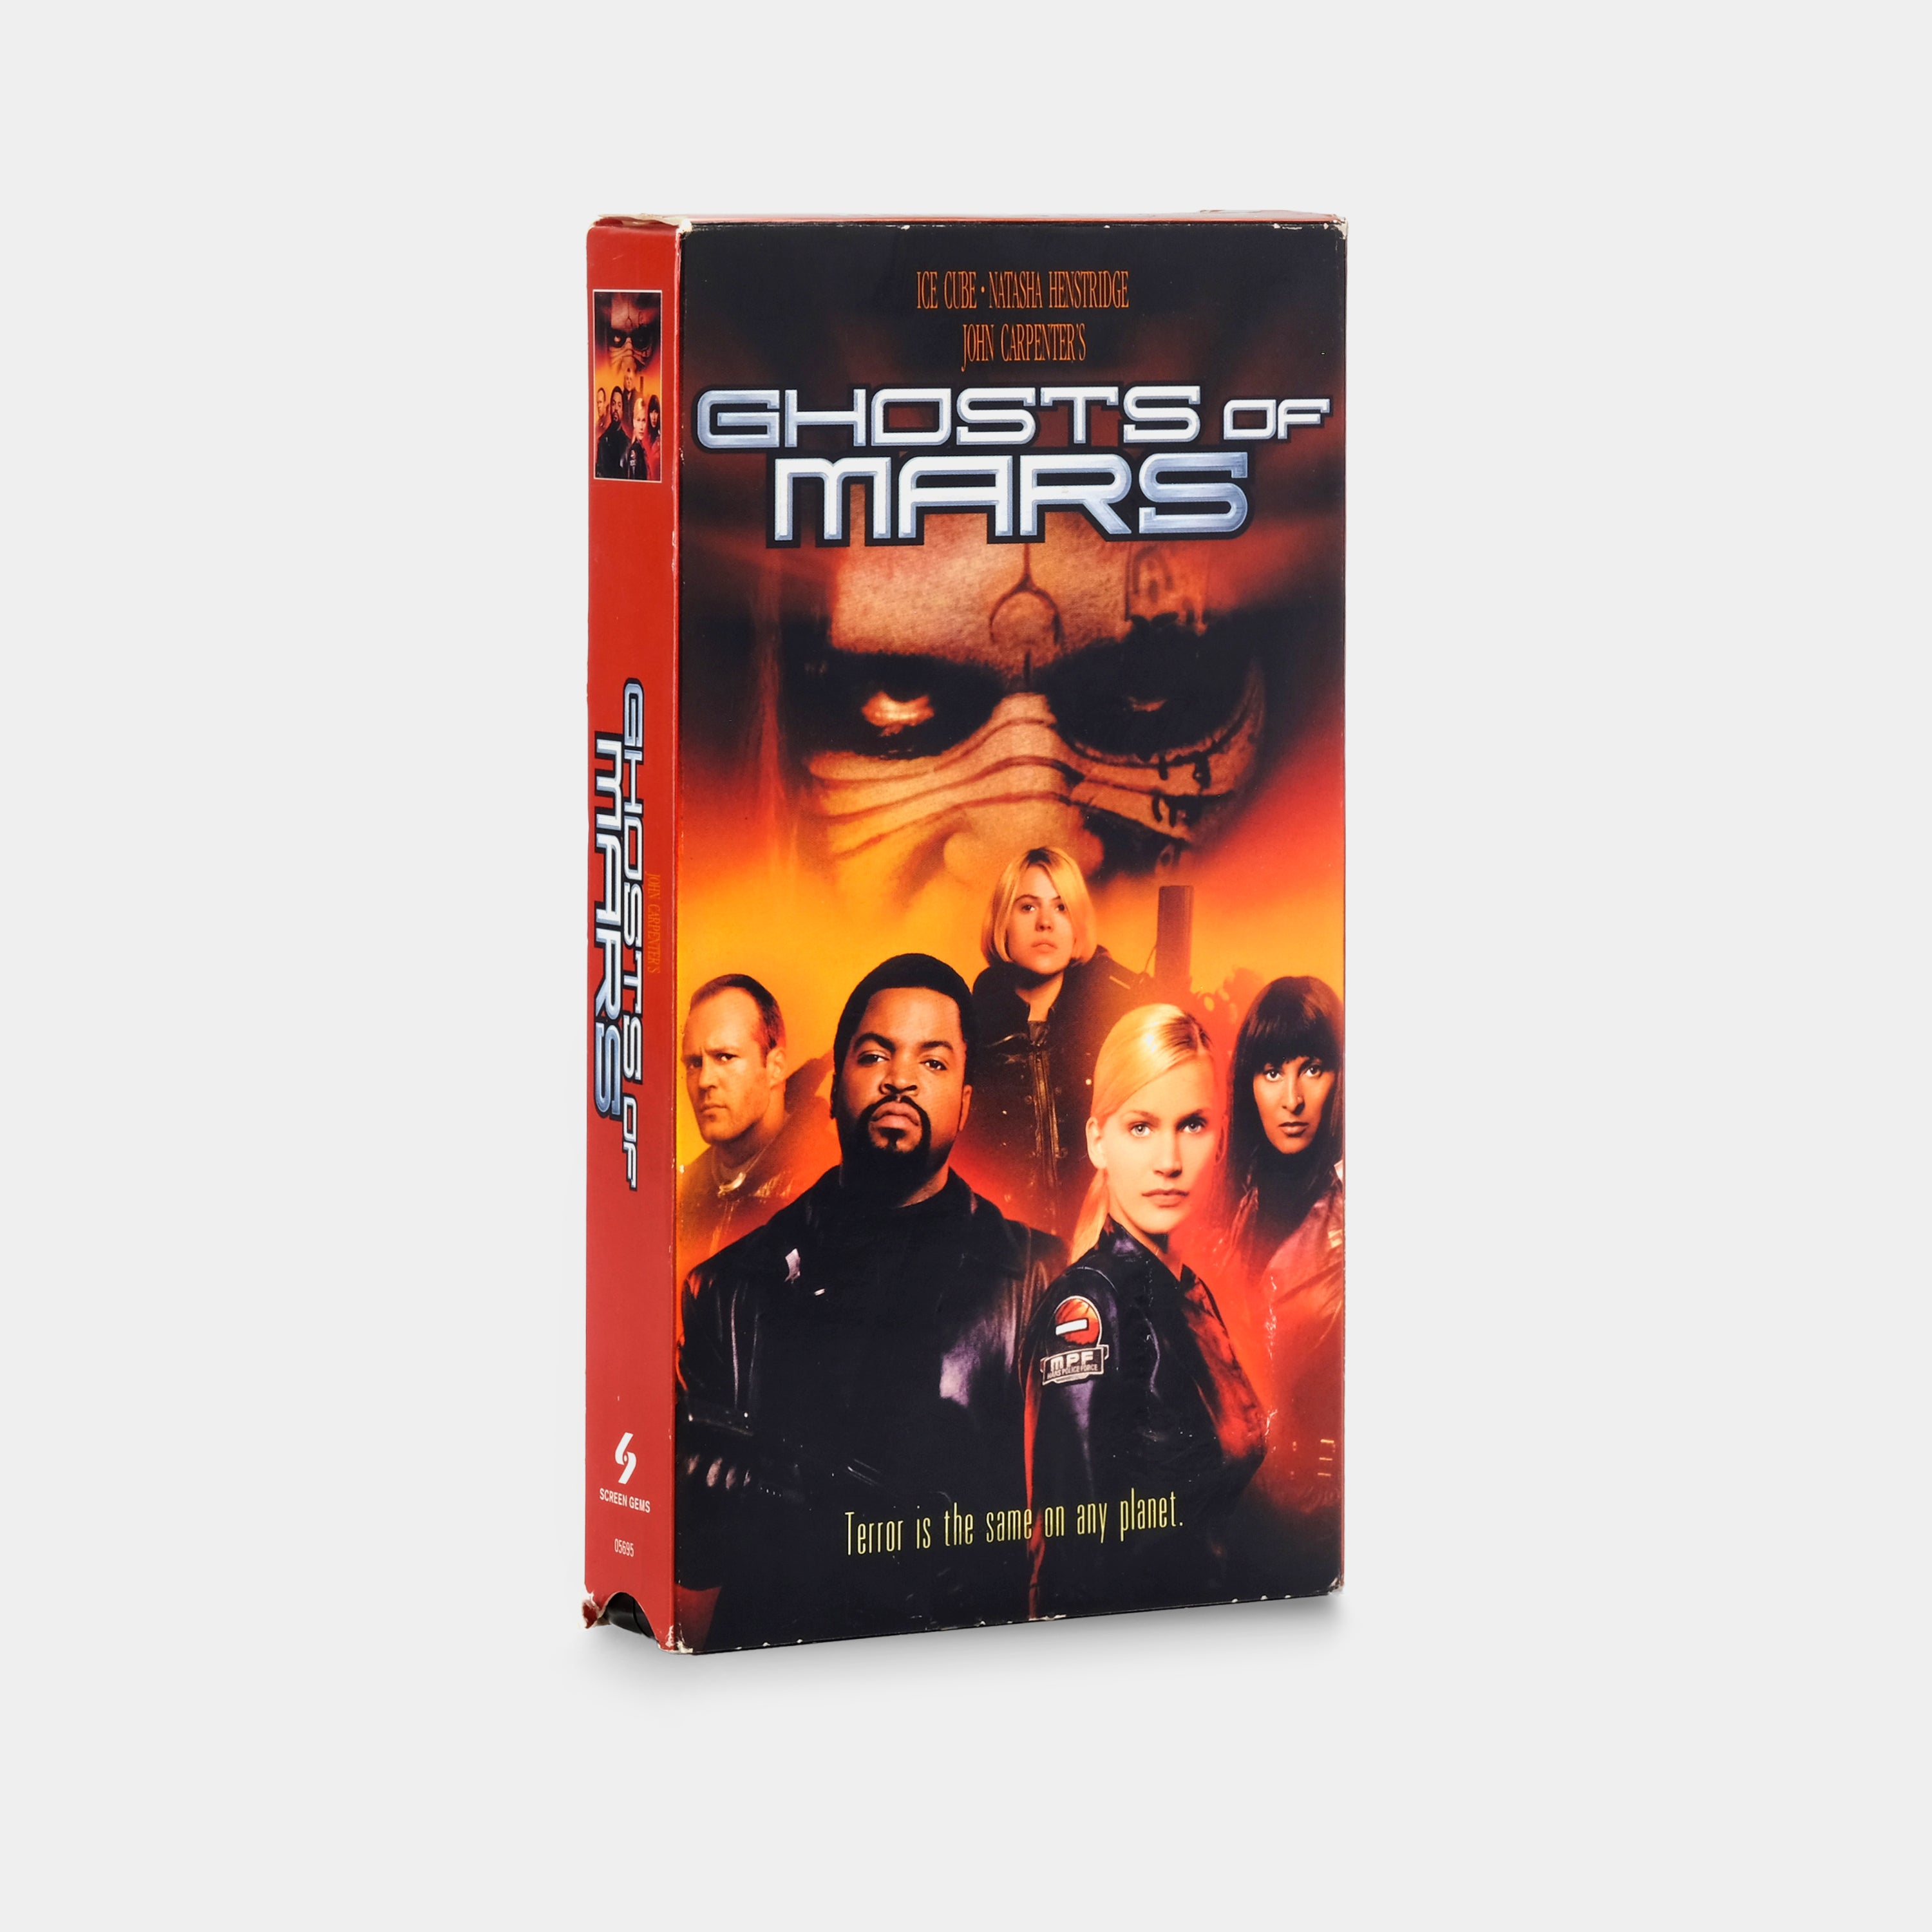 Ghosts of Mars VHS Tape